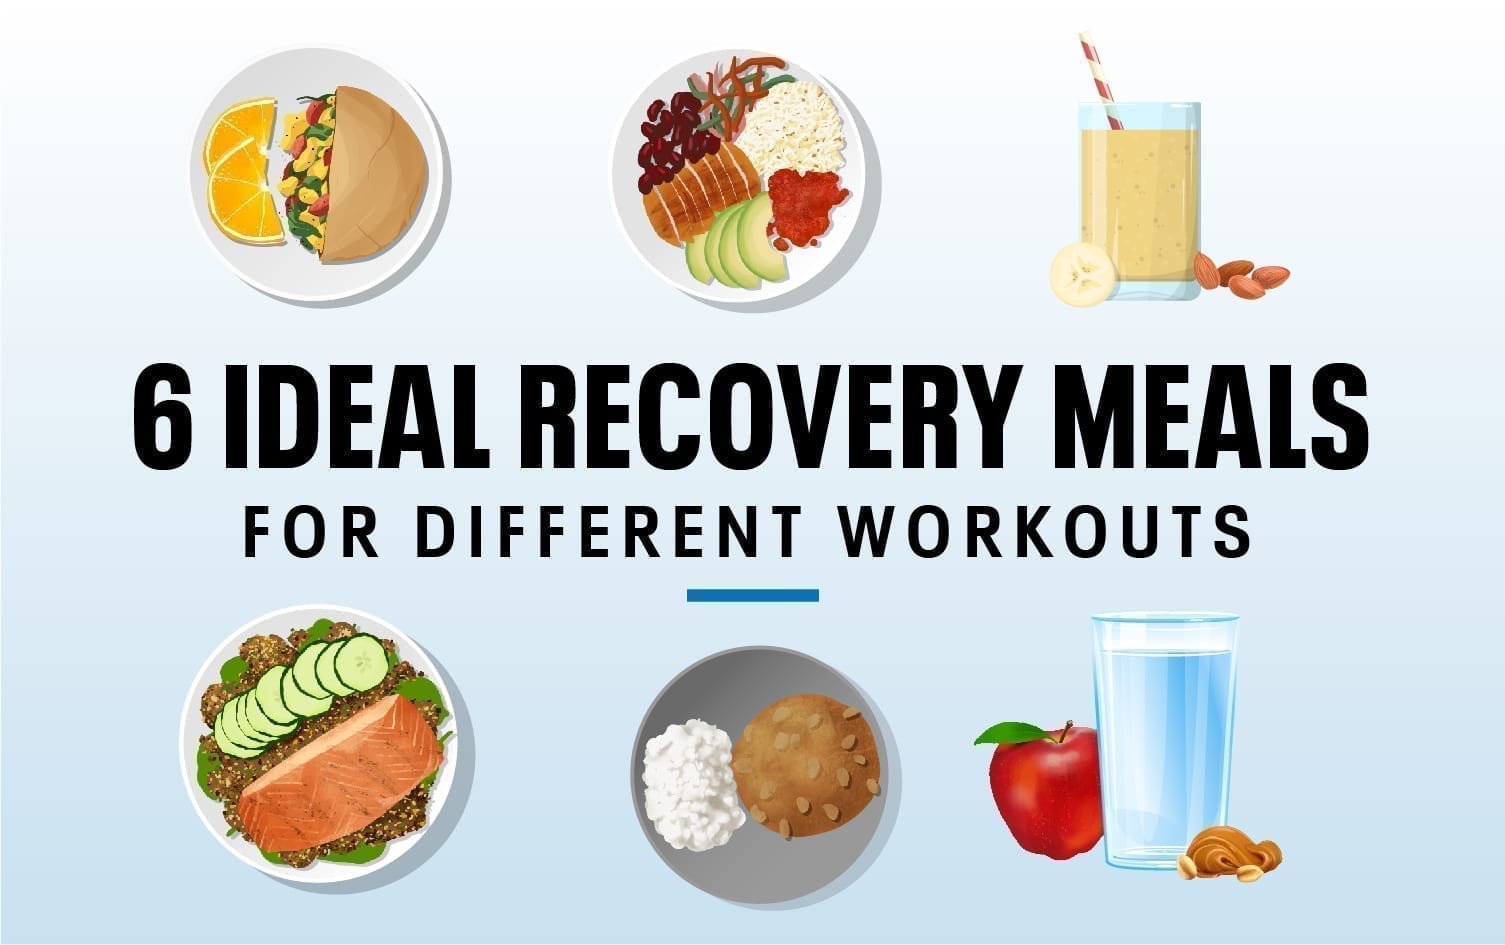 Sports recovery meals